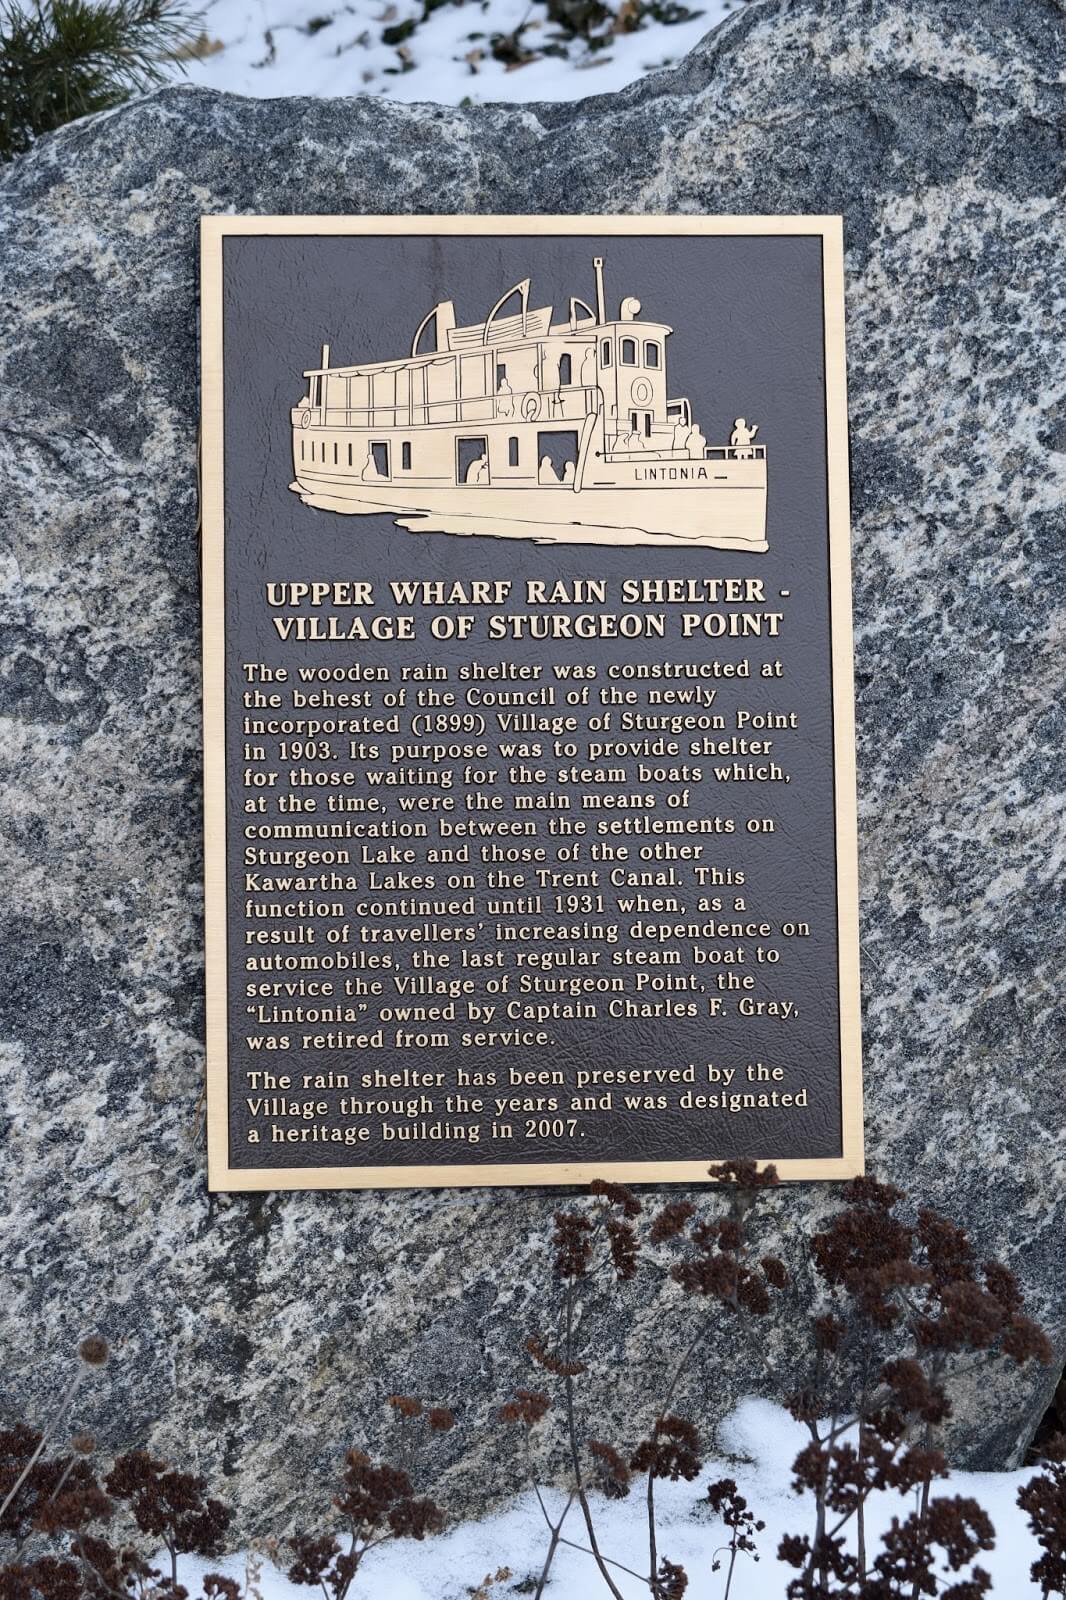 A plaque dedicated to the Upper Wharf Rain Shelter explaining the heritage significance of the building